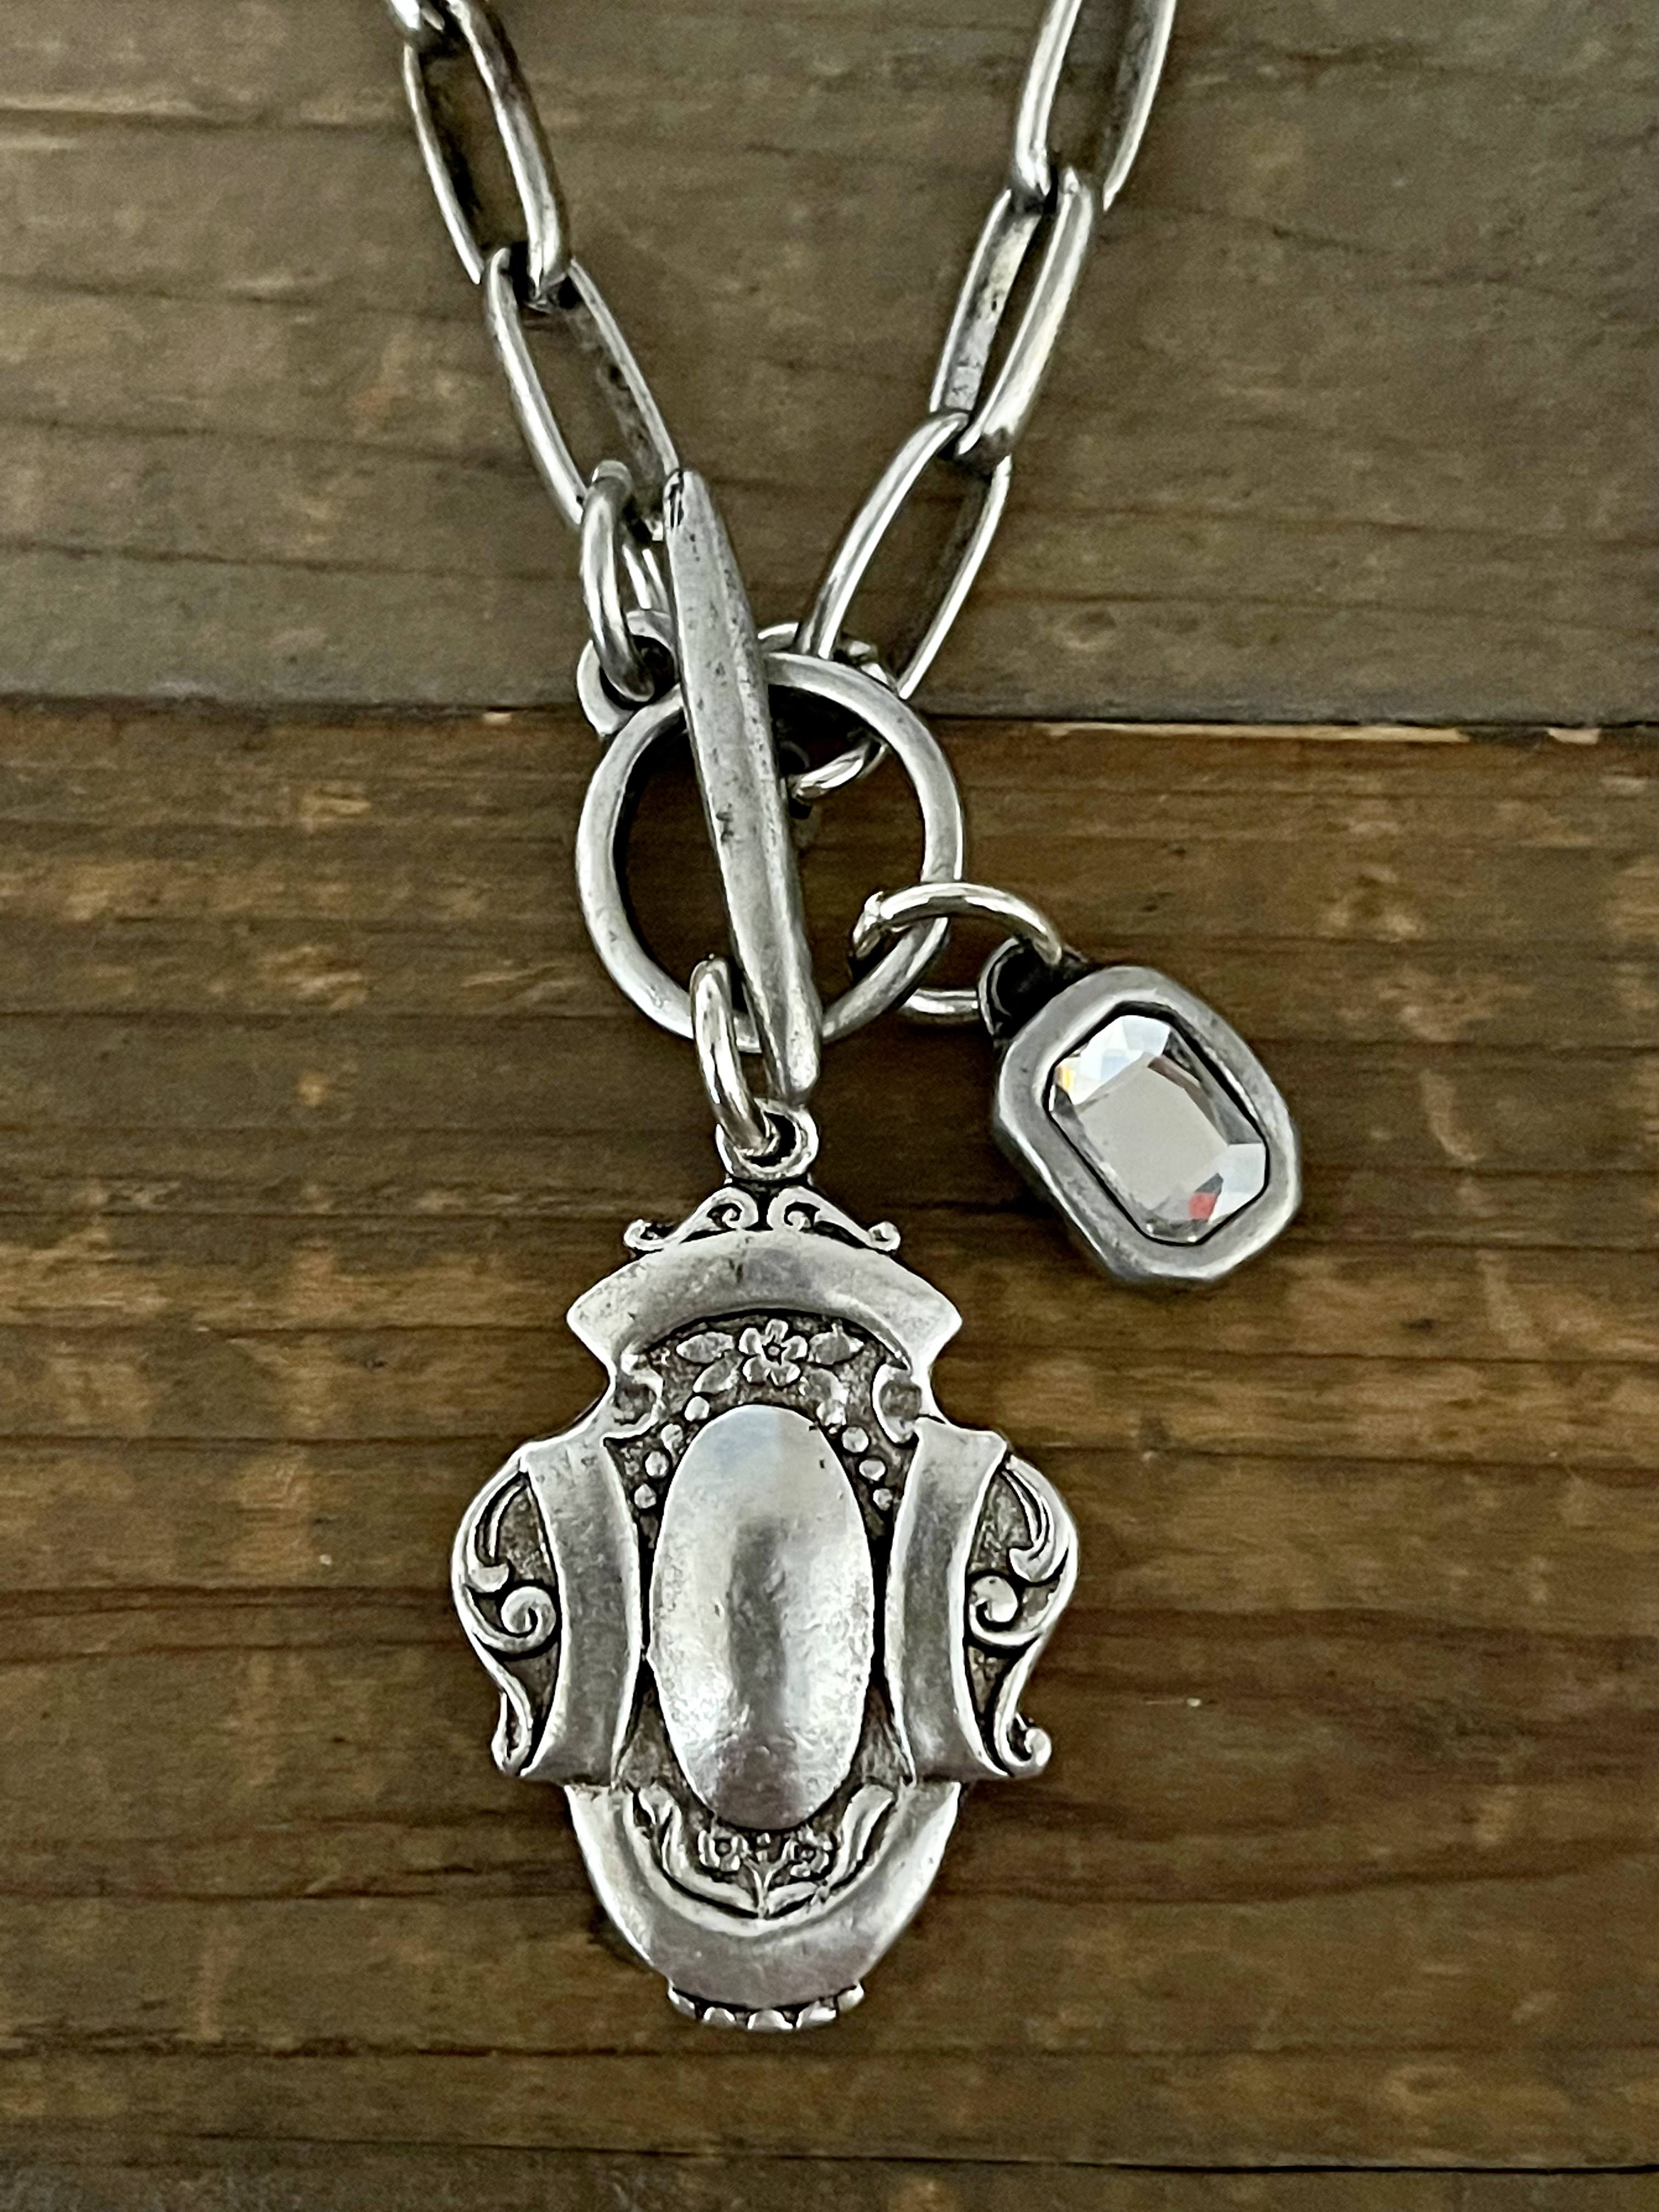 Sterling Plated 18" Chain with Reproduction Watch Fob Pendant and Swarovski Crystal